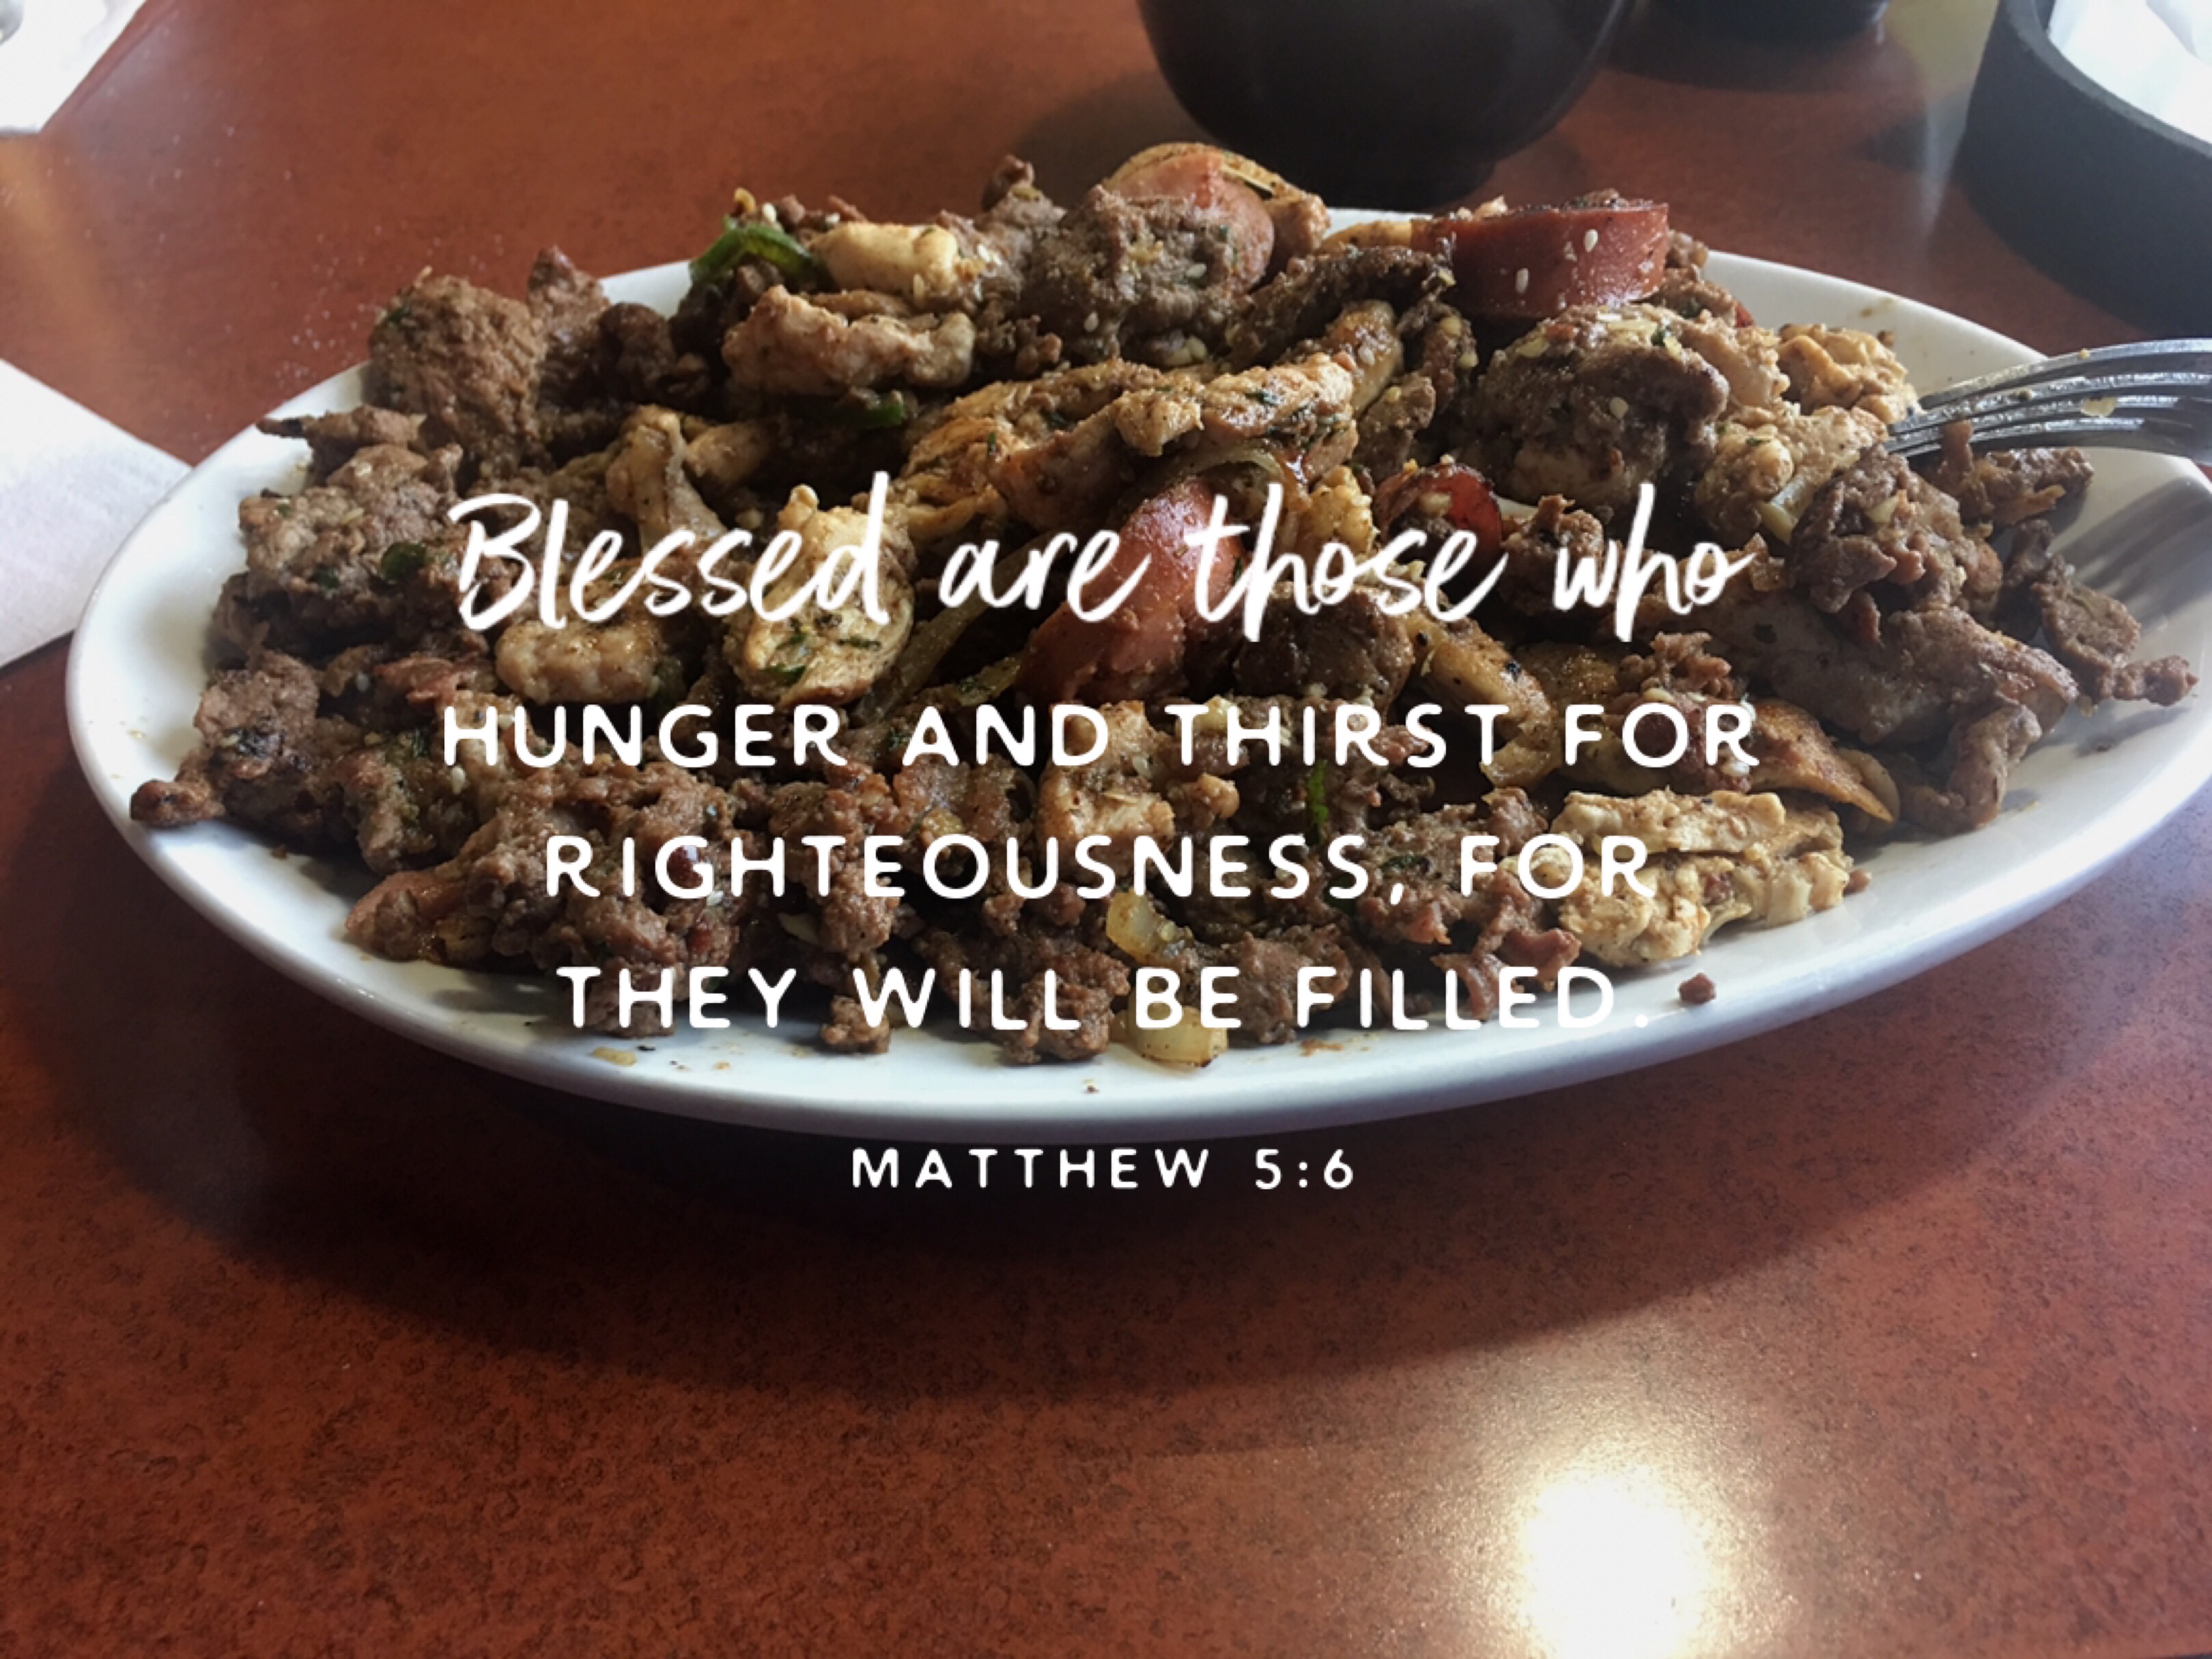 “Blessed are those who hunger and thirst for righteousness, for they shall be satisfied. Matthew 5:6